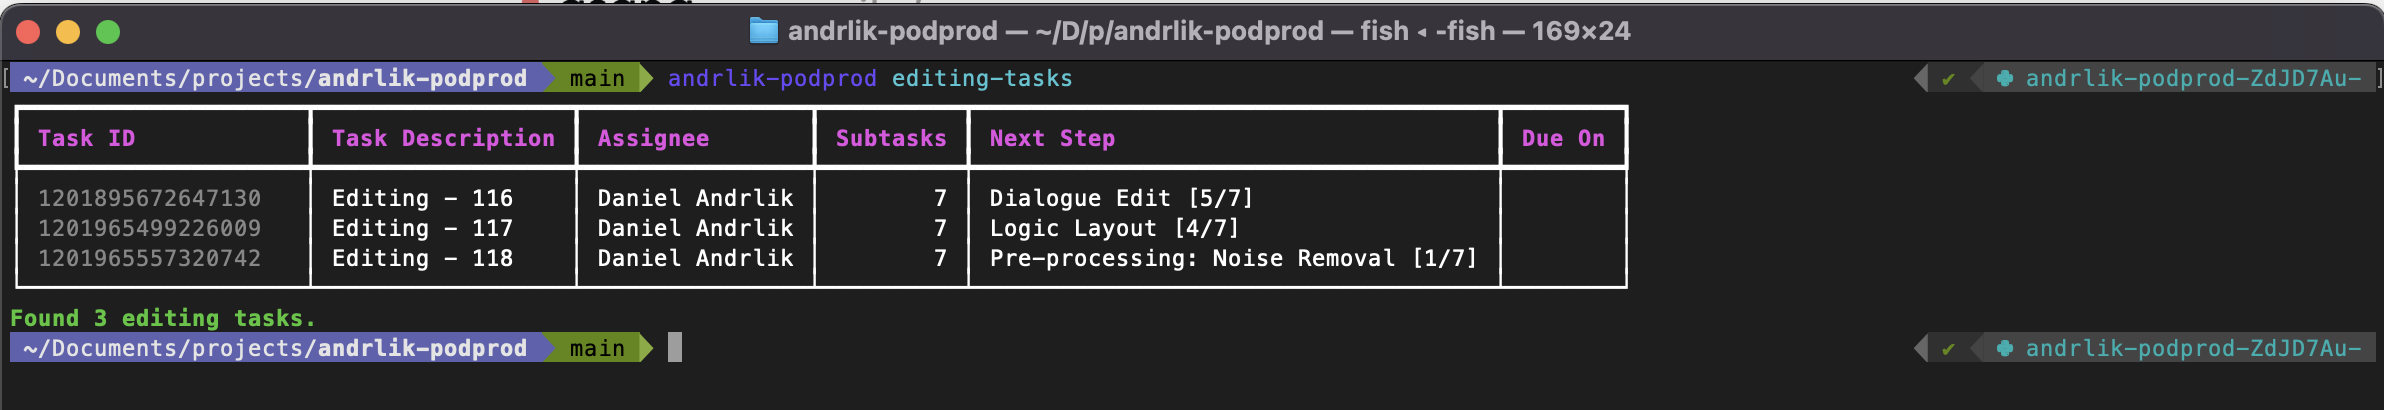 Screenshot of terminal shows current directory to the left and git tree status, activated virtualenv on the right. The results of a command to fetch podcast editing tasks are displayed, which is a table of three episodes at various states of completion.